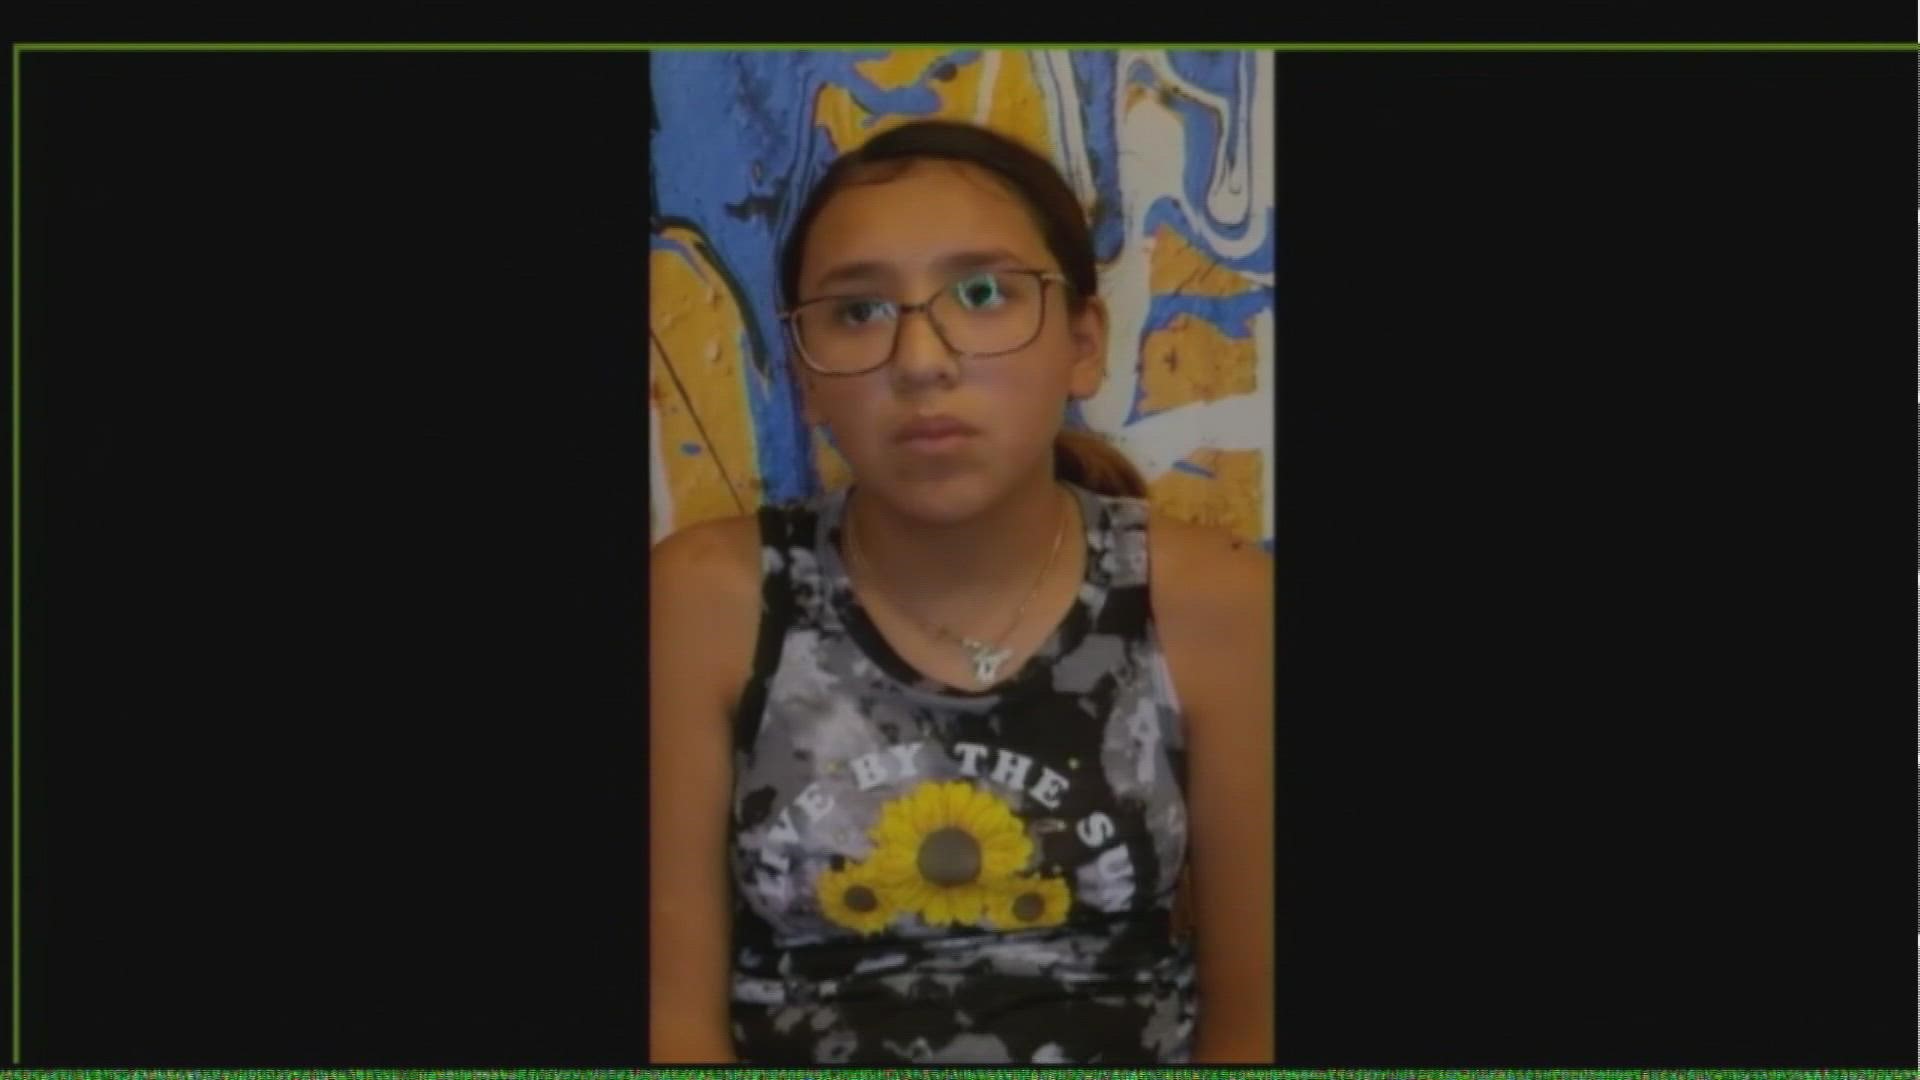 11-year-old Miah Cerrillo was in the Uvalde classroom. She recorded her story to be played in front of Congress. Her father, a victim's mother also spoke out.